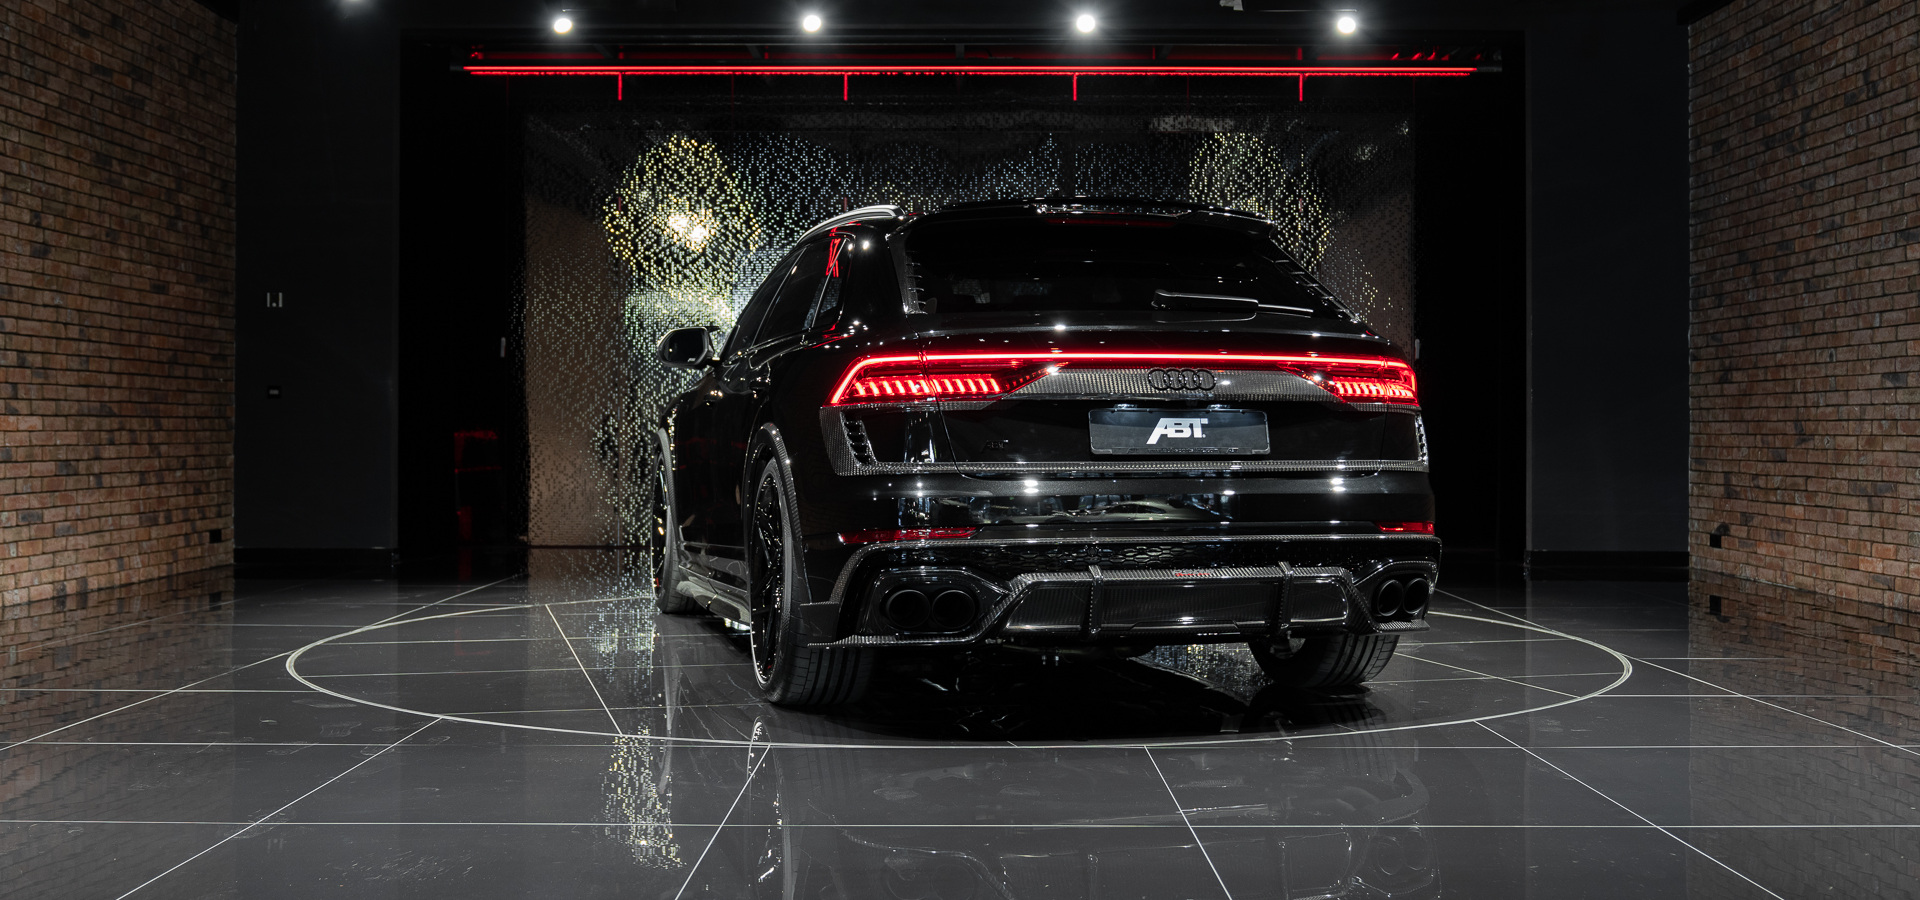 RSQ8 SIGNATURE EDITION - Audi Tuning, VW Tuning, Chiptuning von ABT  Sportsline.